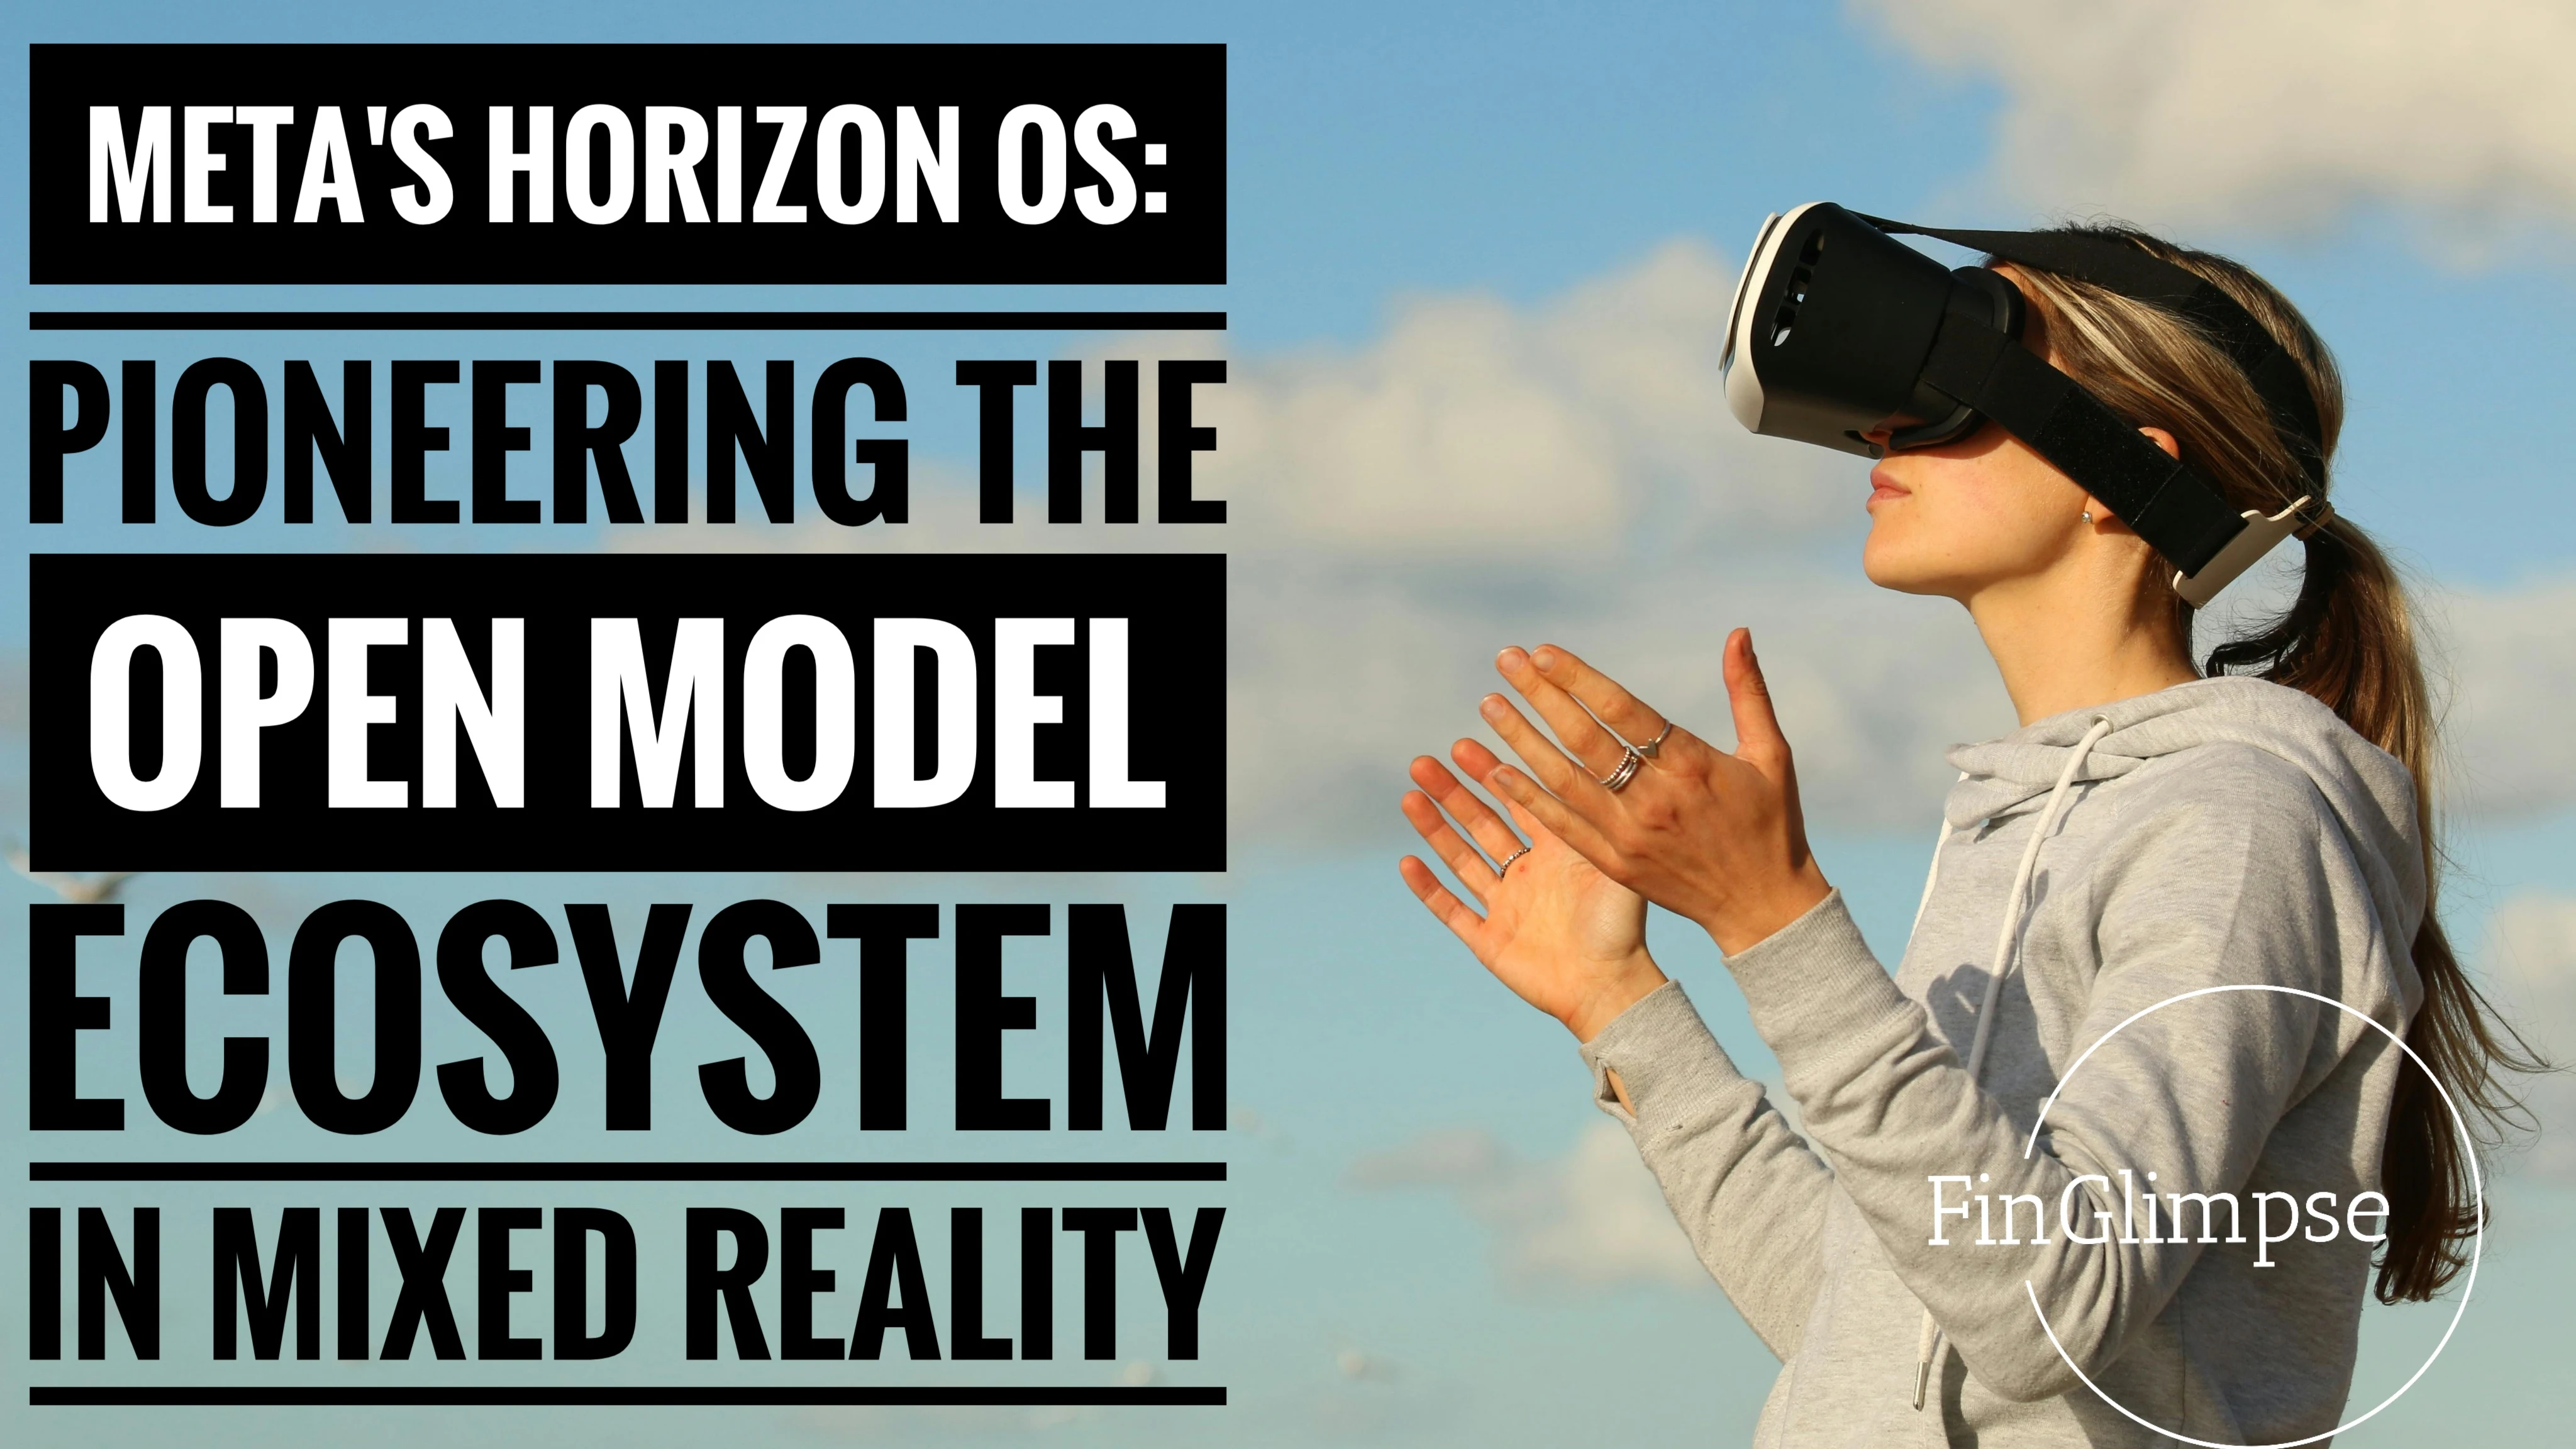 Meta unveils Horizon OS, an open-source VR/MR operating system designed for collaboration and innovation. This game-changer empowers developers and fosters a diverse VR/MR future.